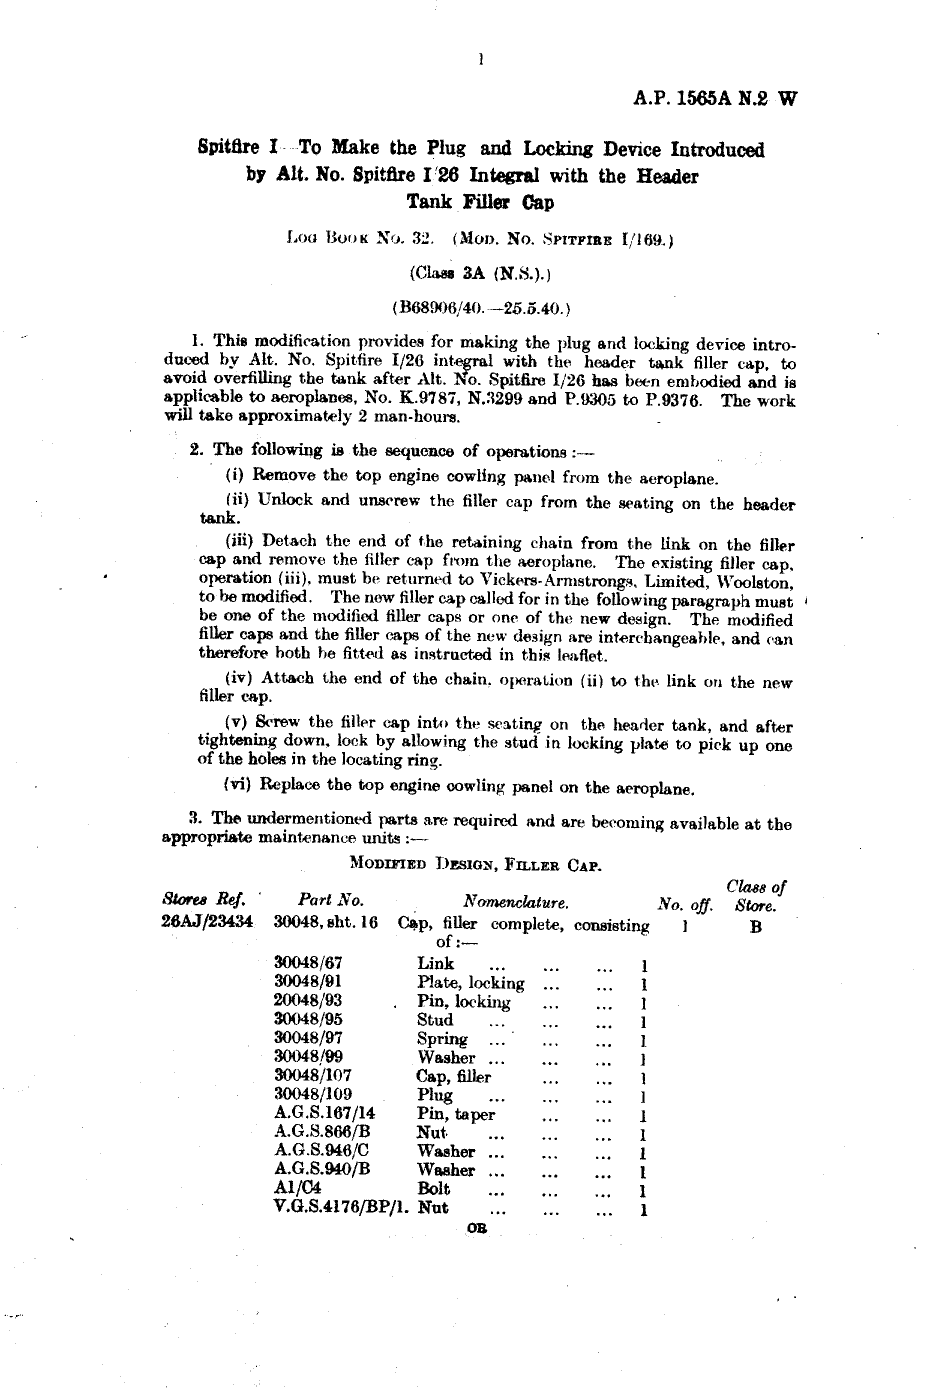 Sample page 1 from AirCorps Library document: Spitfire I To Make the Plug and Locking Device Introduced by Alt. No. 26 Integral with the Header Tank Filler Cap